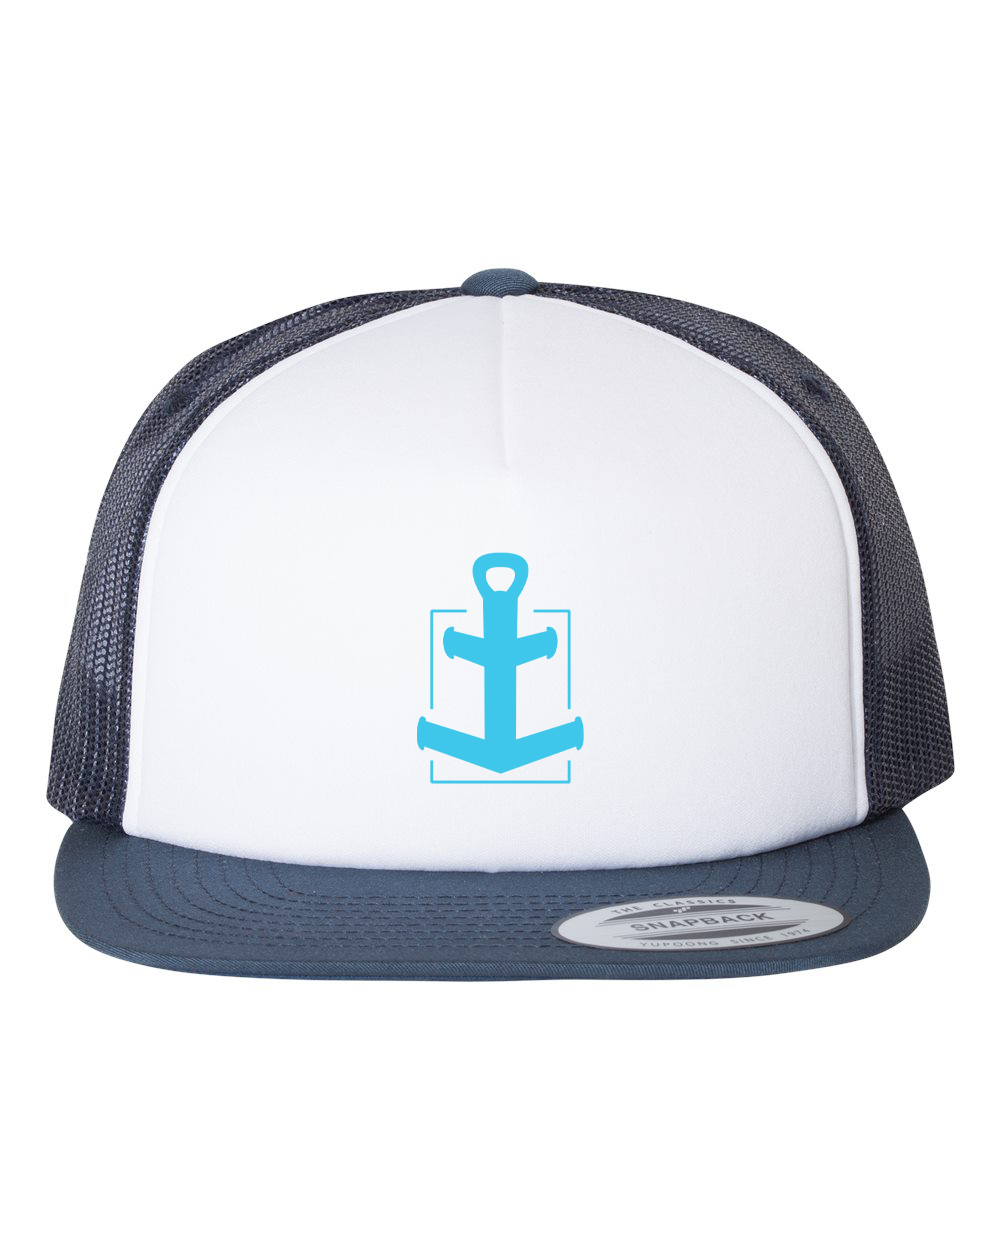 custom design of Yupoong 6005FW - Drop Ship Foam Trucker with White Front Snapback